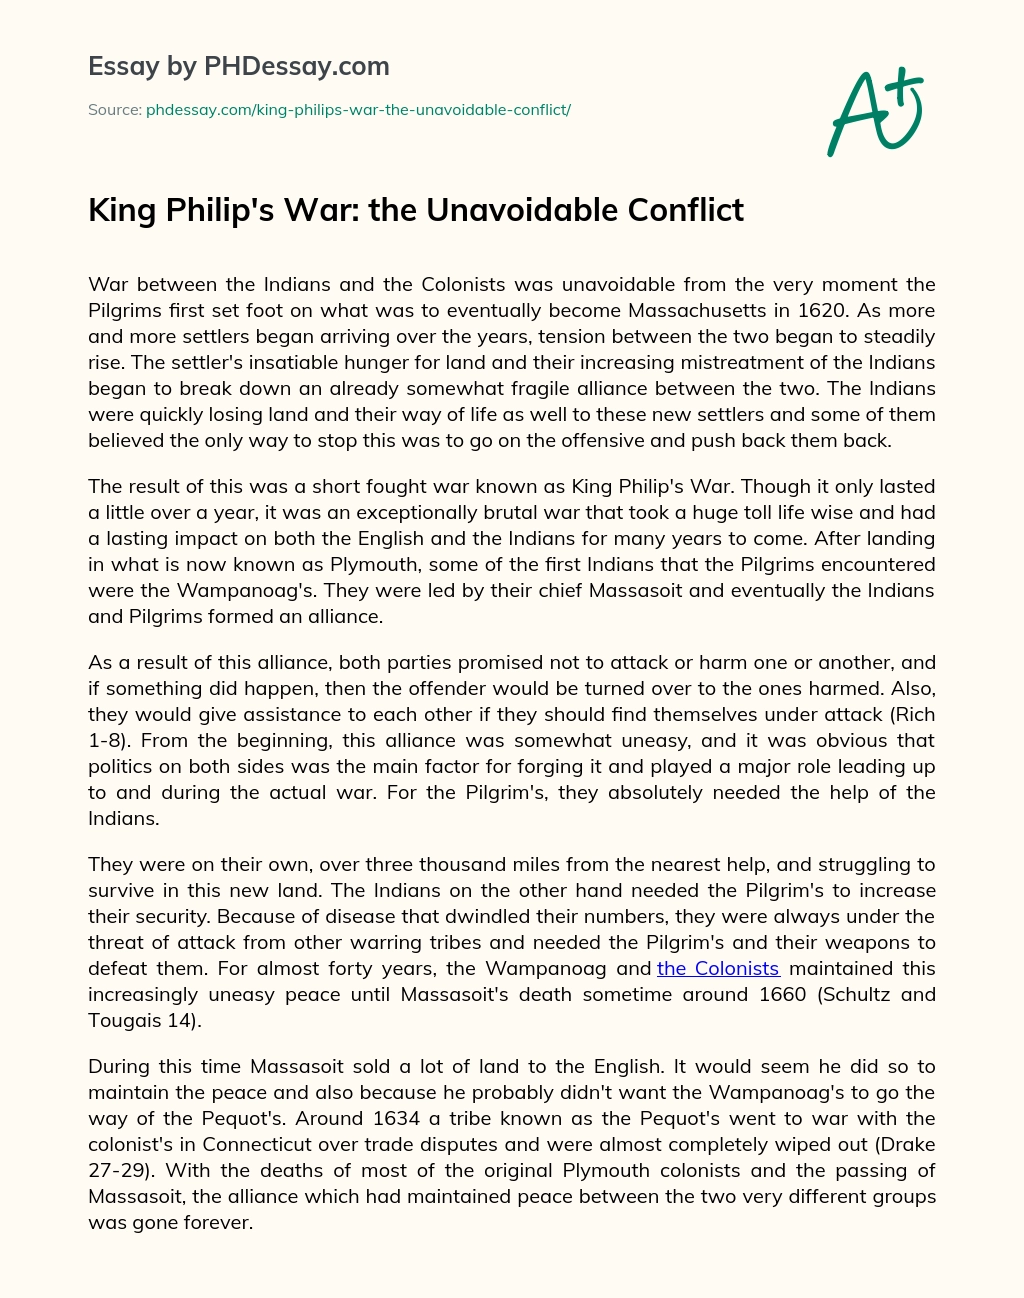 King Philip’s War: the Unavoidable Conflict essay